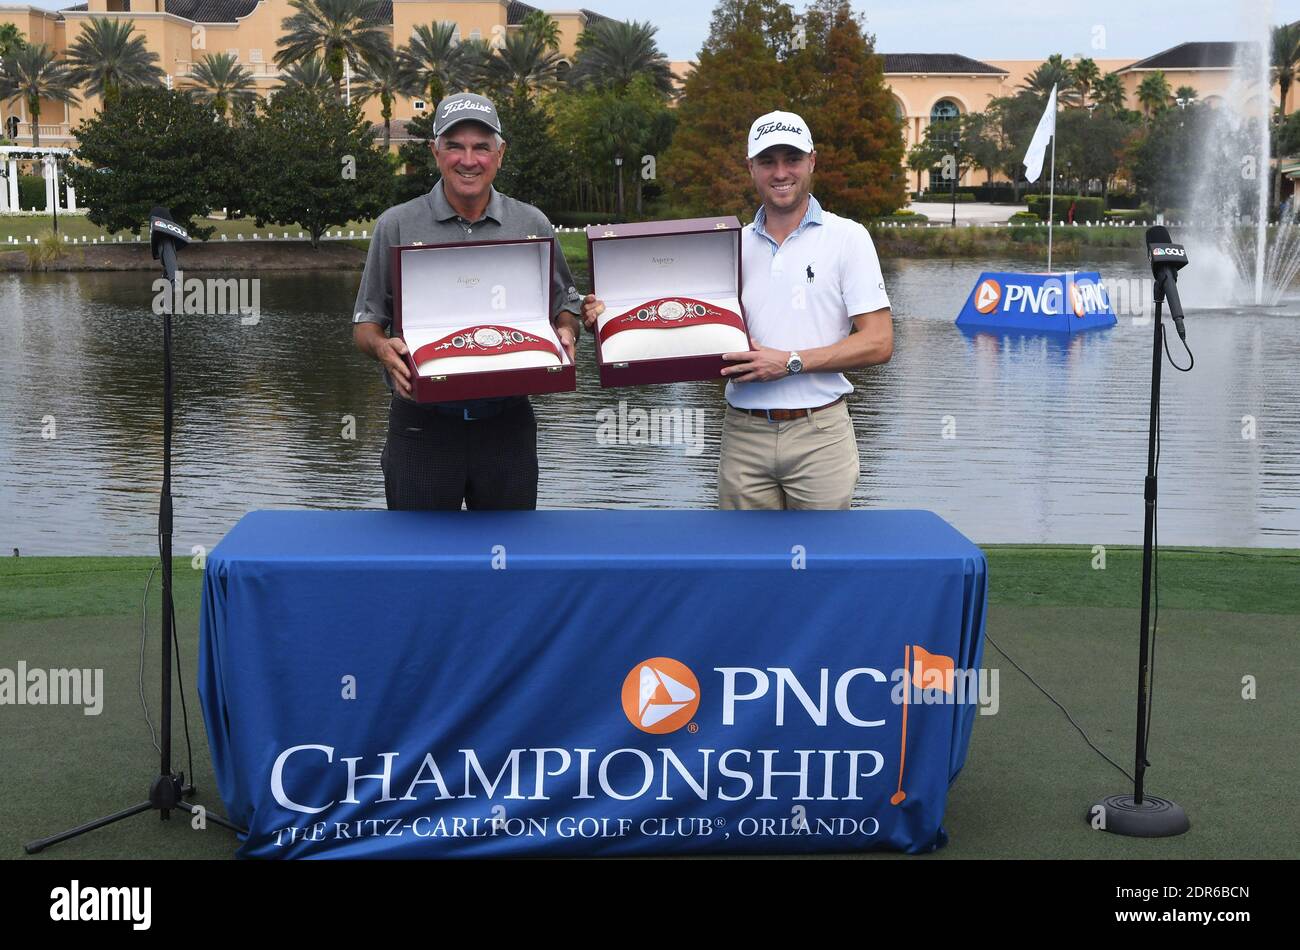 Orlando, United States. 20th Dec, 2020. December 20, 2020 - Orlando, Florida, United States - Justin Thomas (right) and his father, Mike, pose with the Willie Park trophy after winning the 2020 PNC Championship golf tournament at the Ritz-Carlton Golf Club on December 20, 2020 in Orlando, Florida. The team shot 25 under for the tournament and 15 under during Sunday's second round. Credit: Paul Hennessy/Alamy Live News Stock Photo